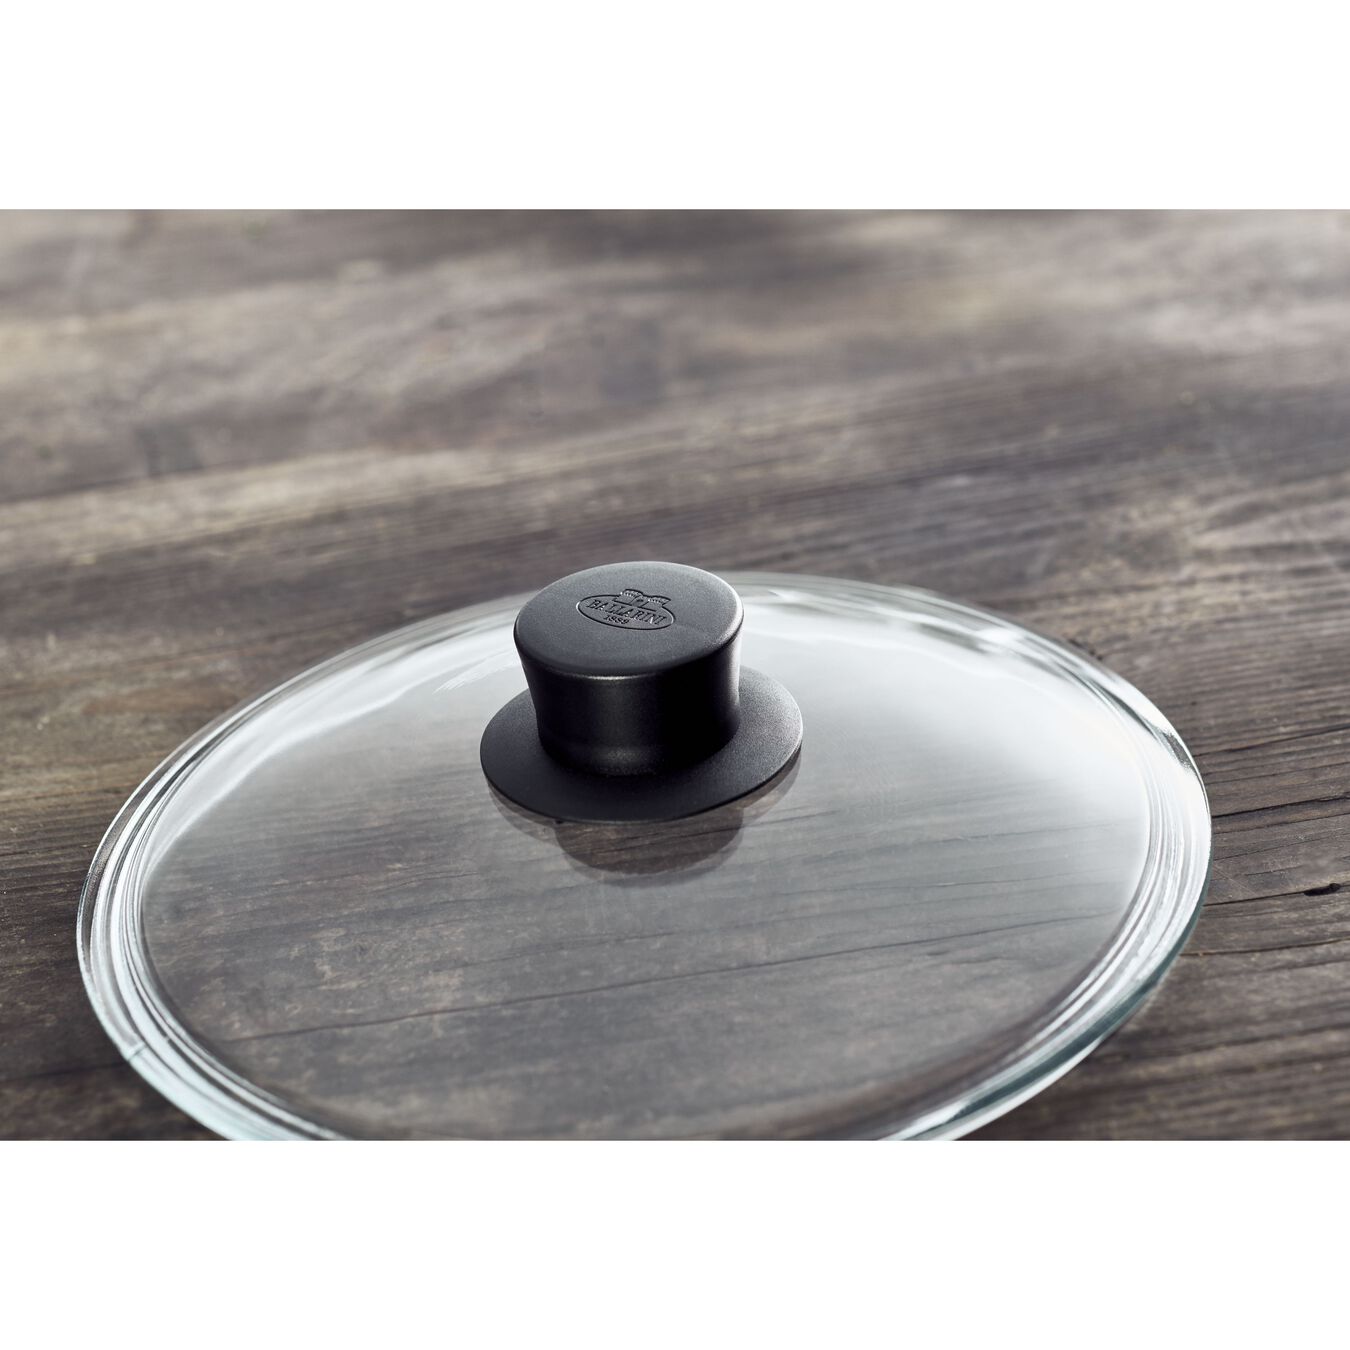  PTFE round Saucier and sauteuse with glass lid, black,,large 4